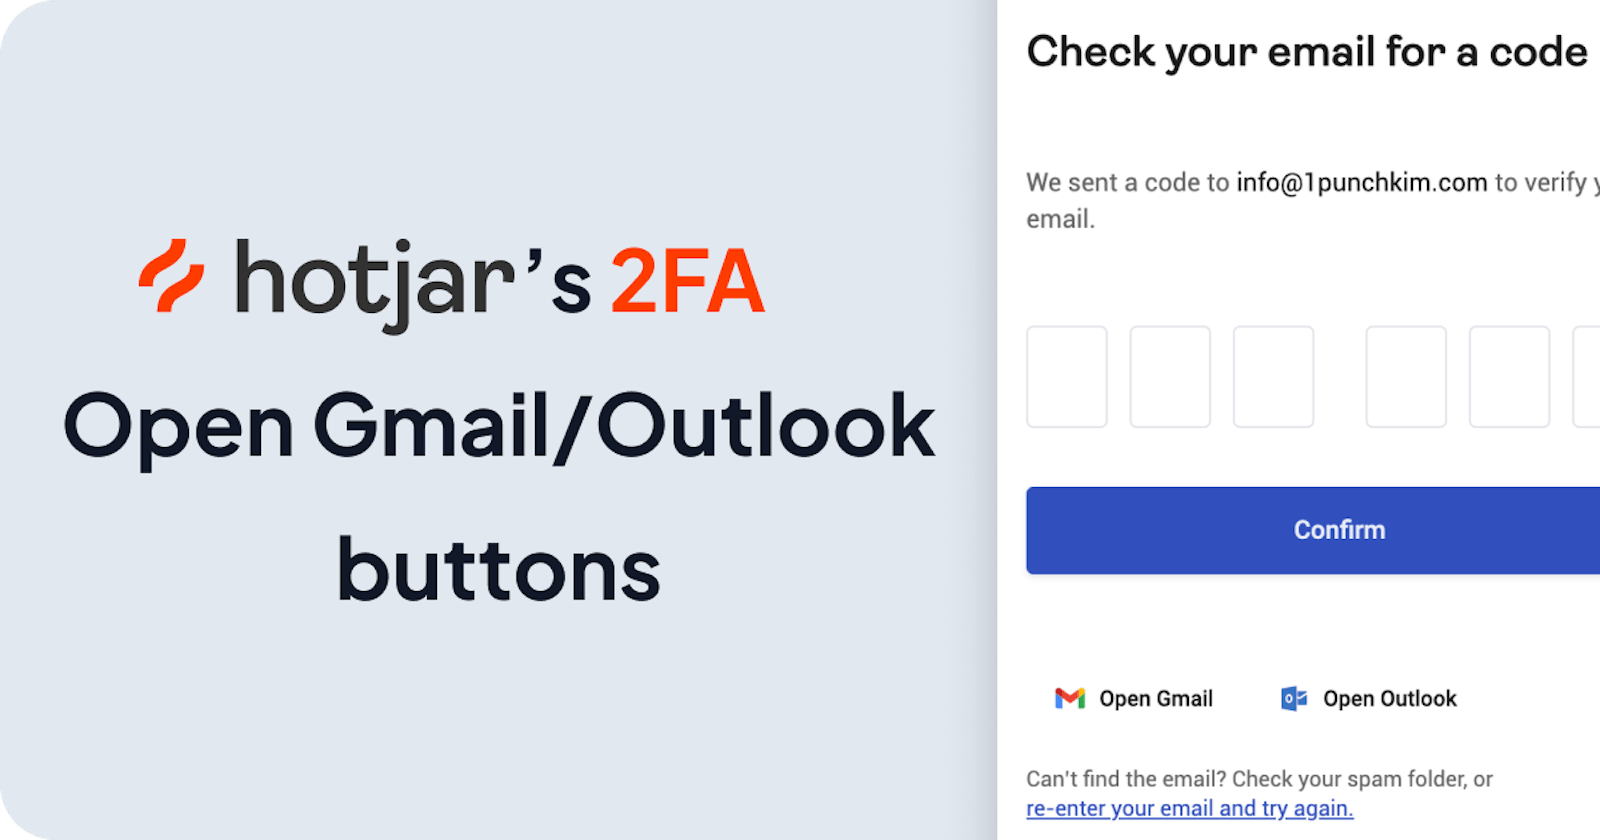 Hotjar's 2FA Open Gmail/Outlook buttons